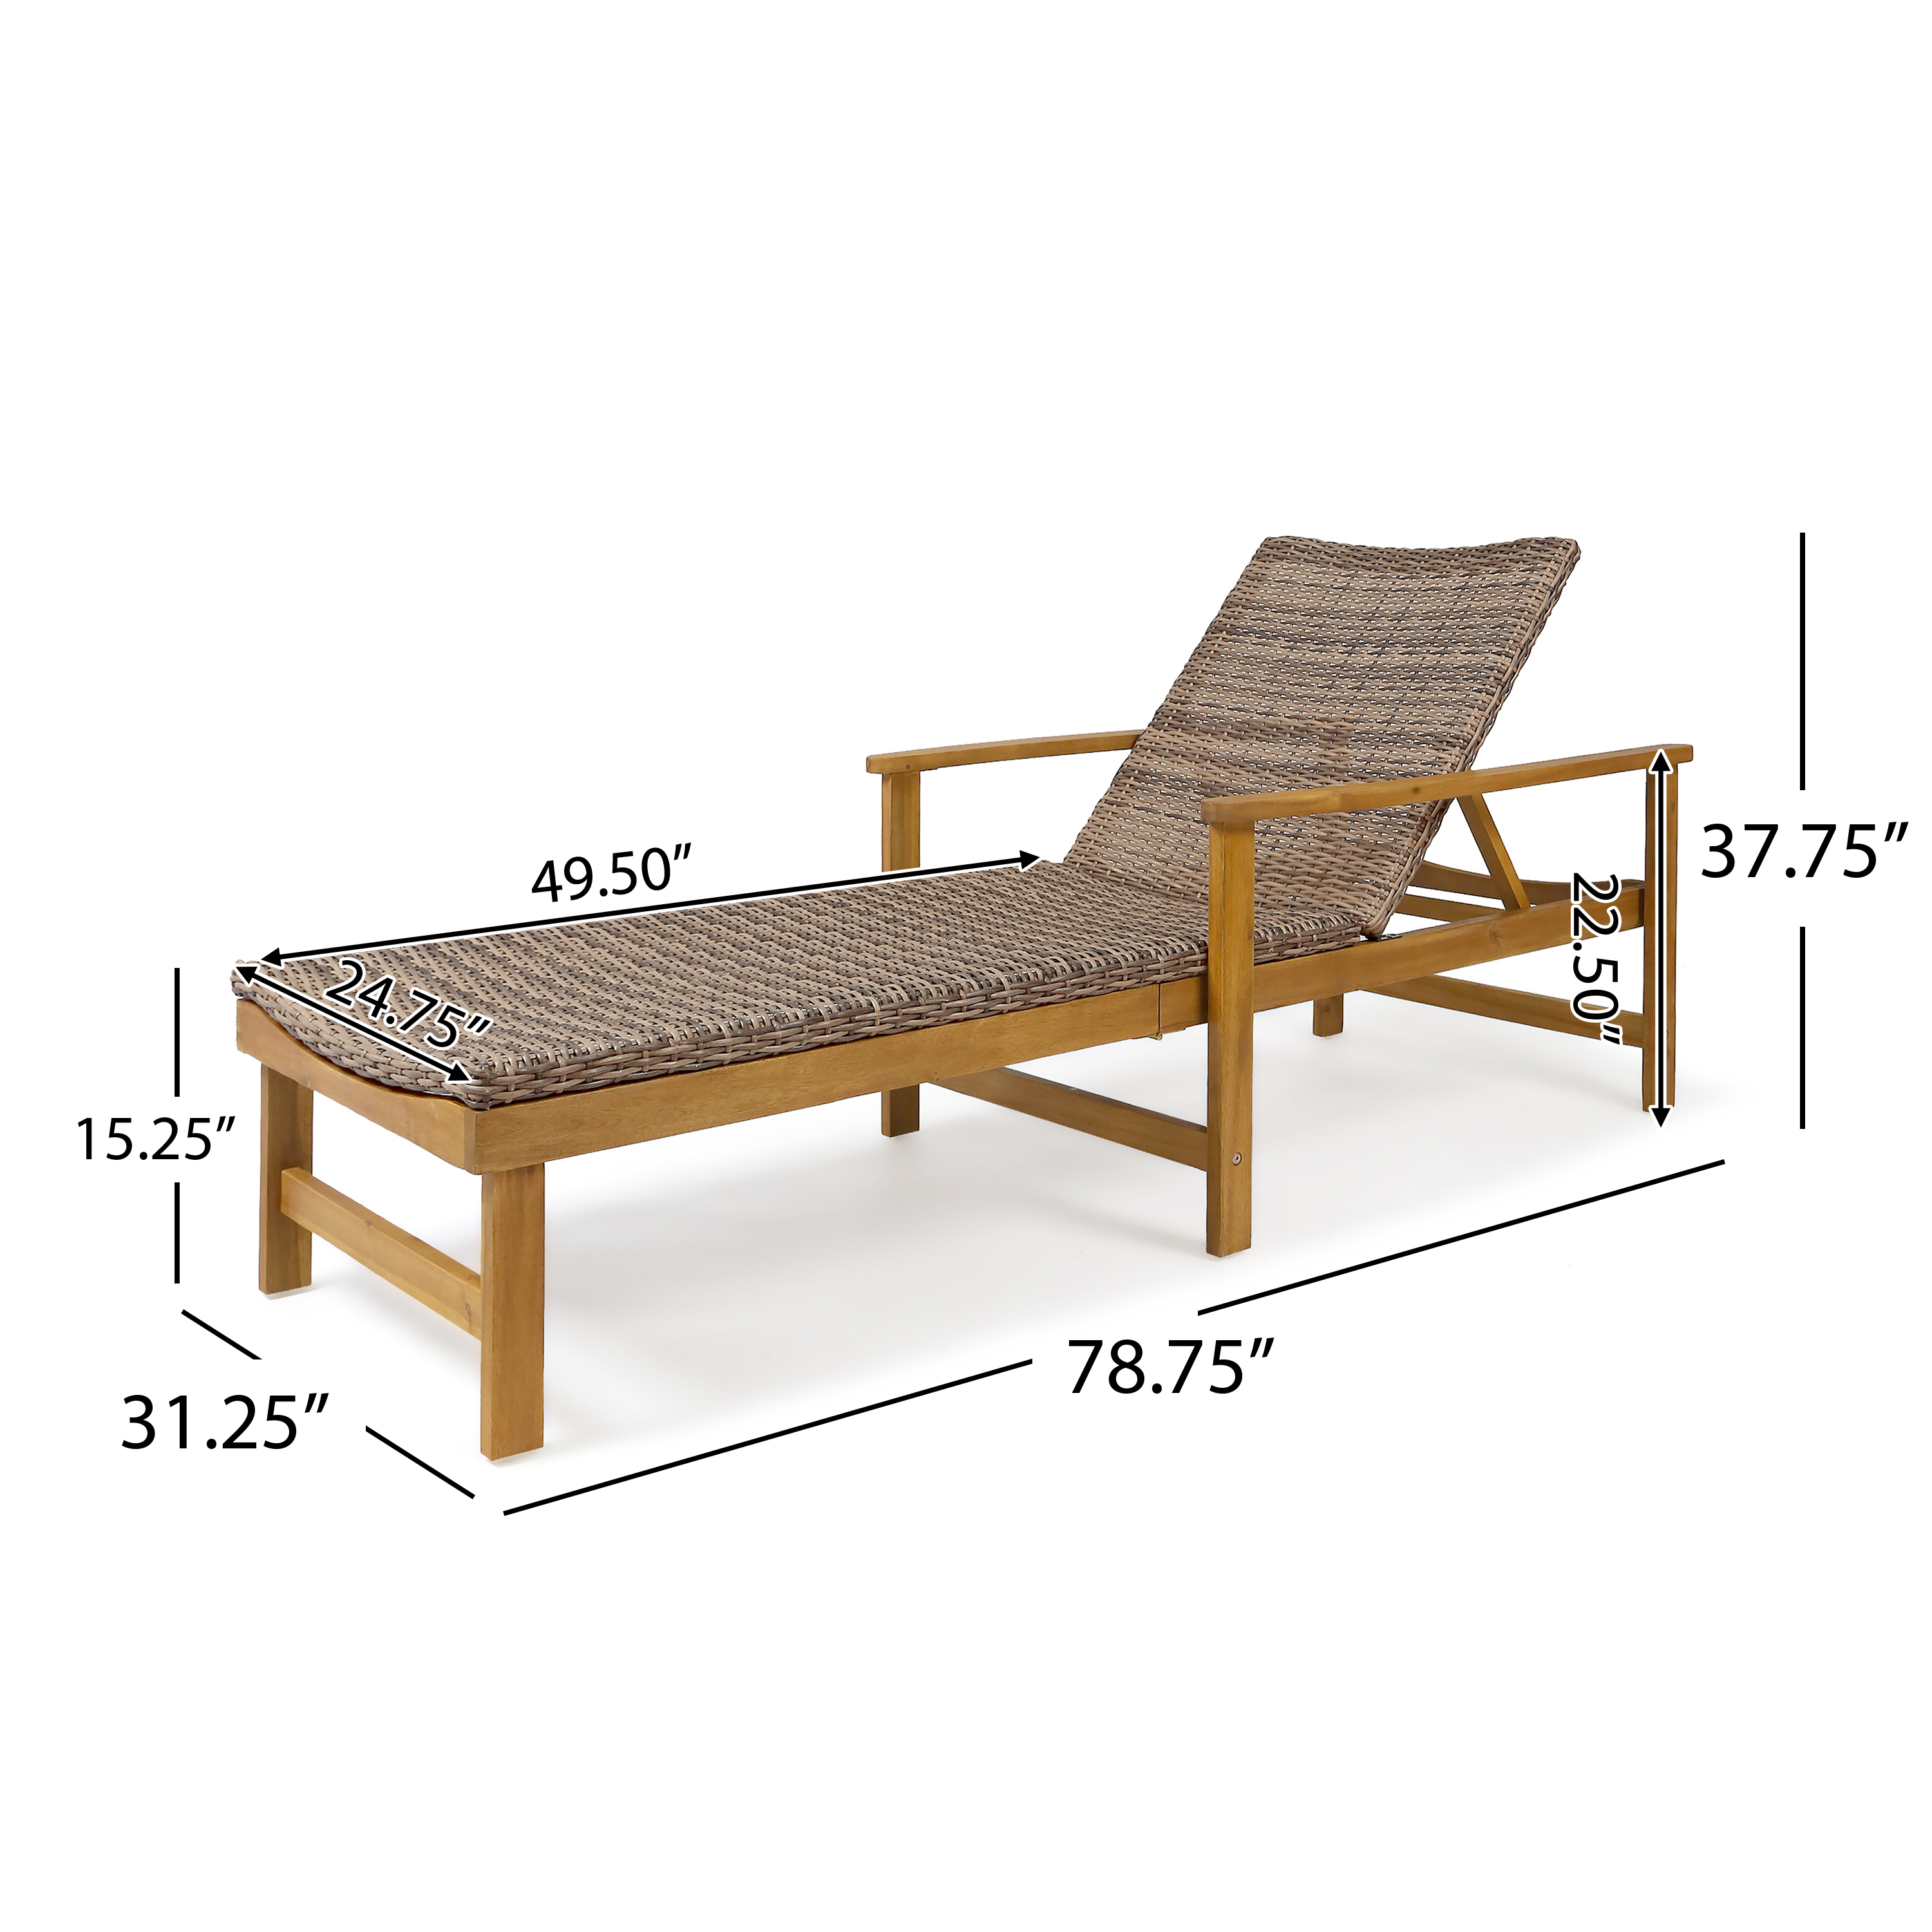 Kyle Outdoor Rustic Acacia Wood Chaise Lounge with Wicker Seating, Natural and Gray - image 2 of 8